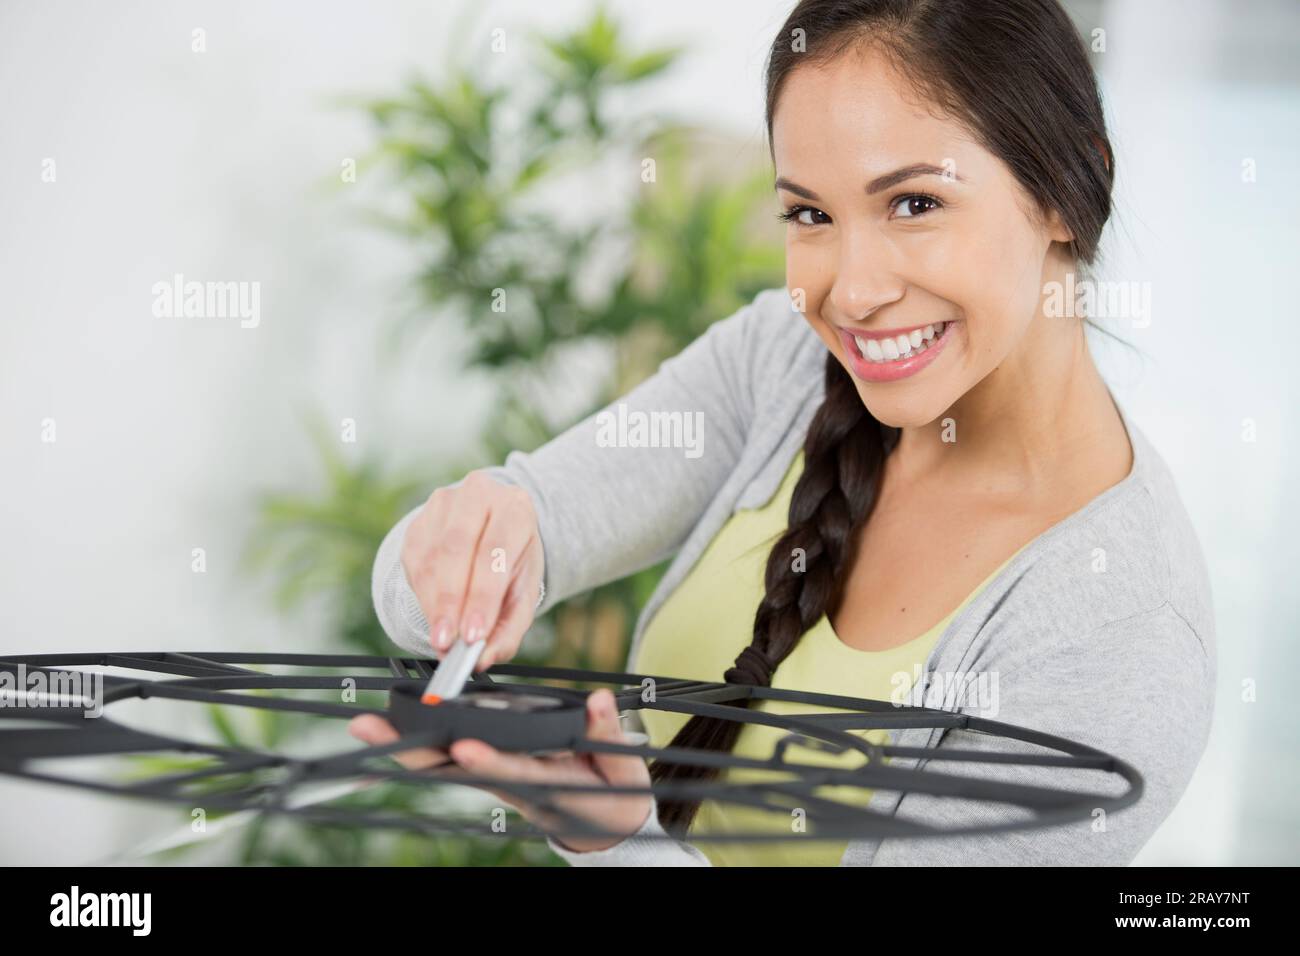 portrait of a happy woman watchmaker Stock Photo